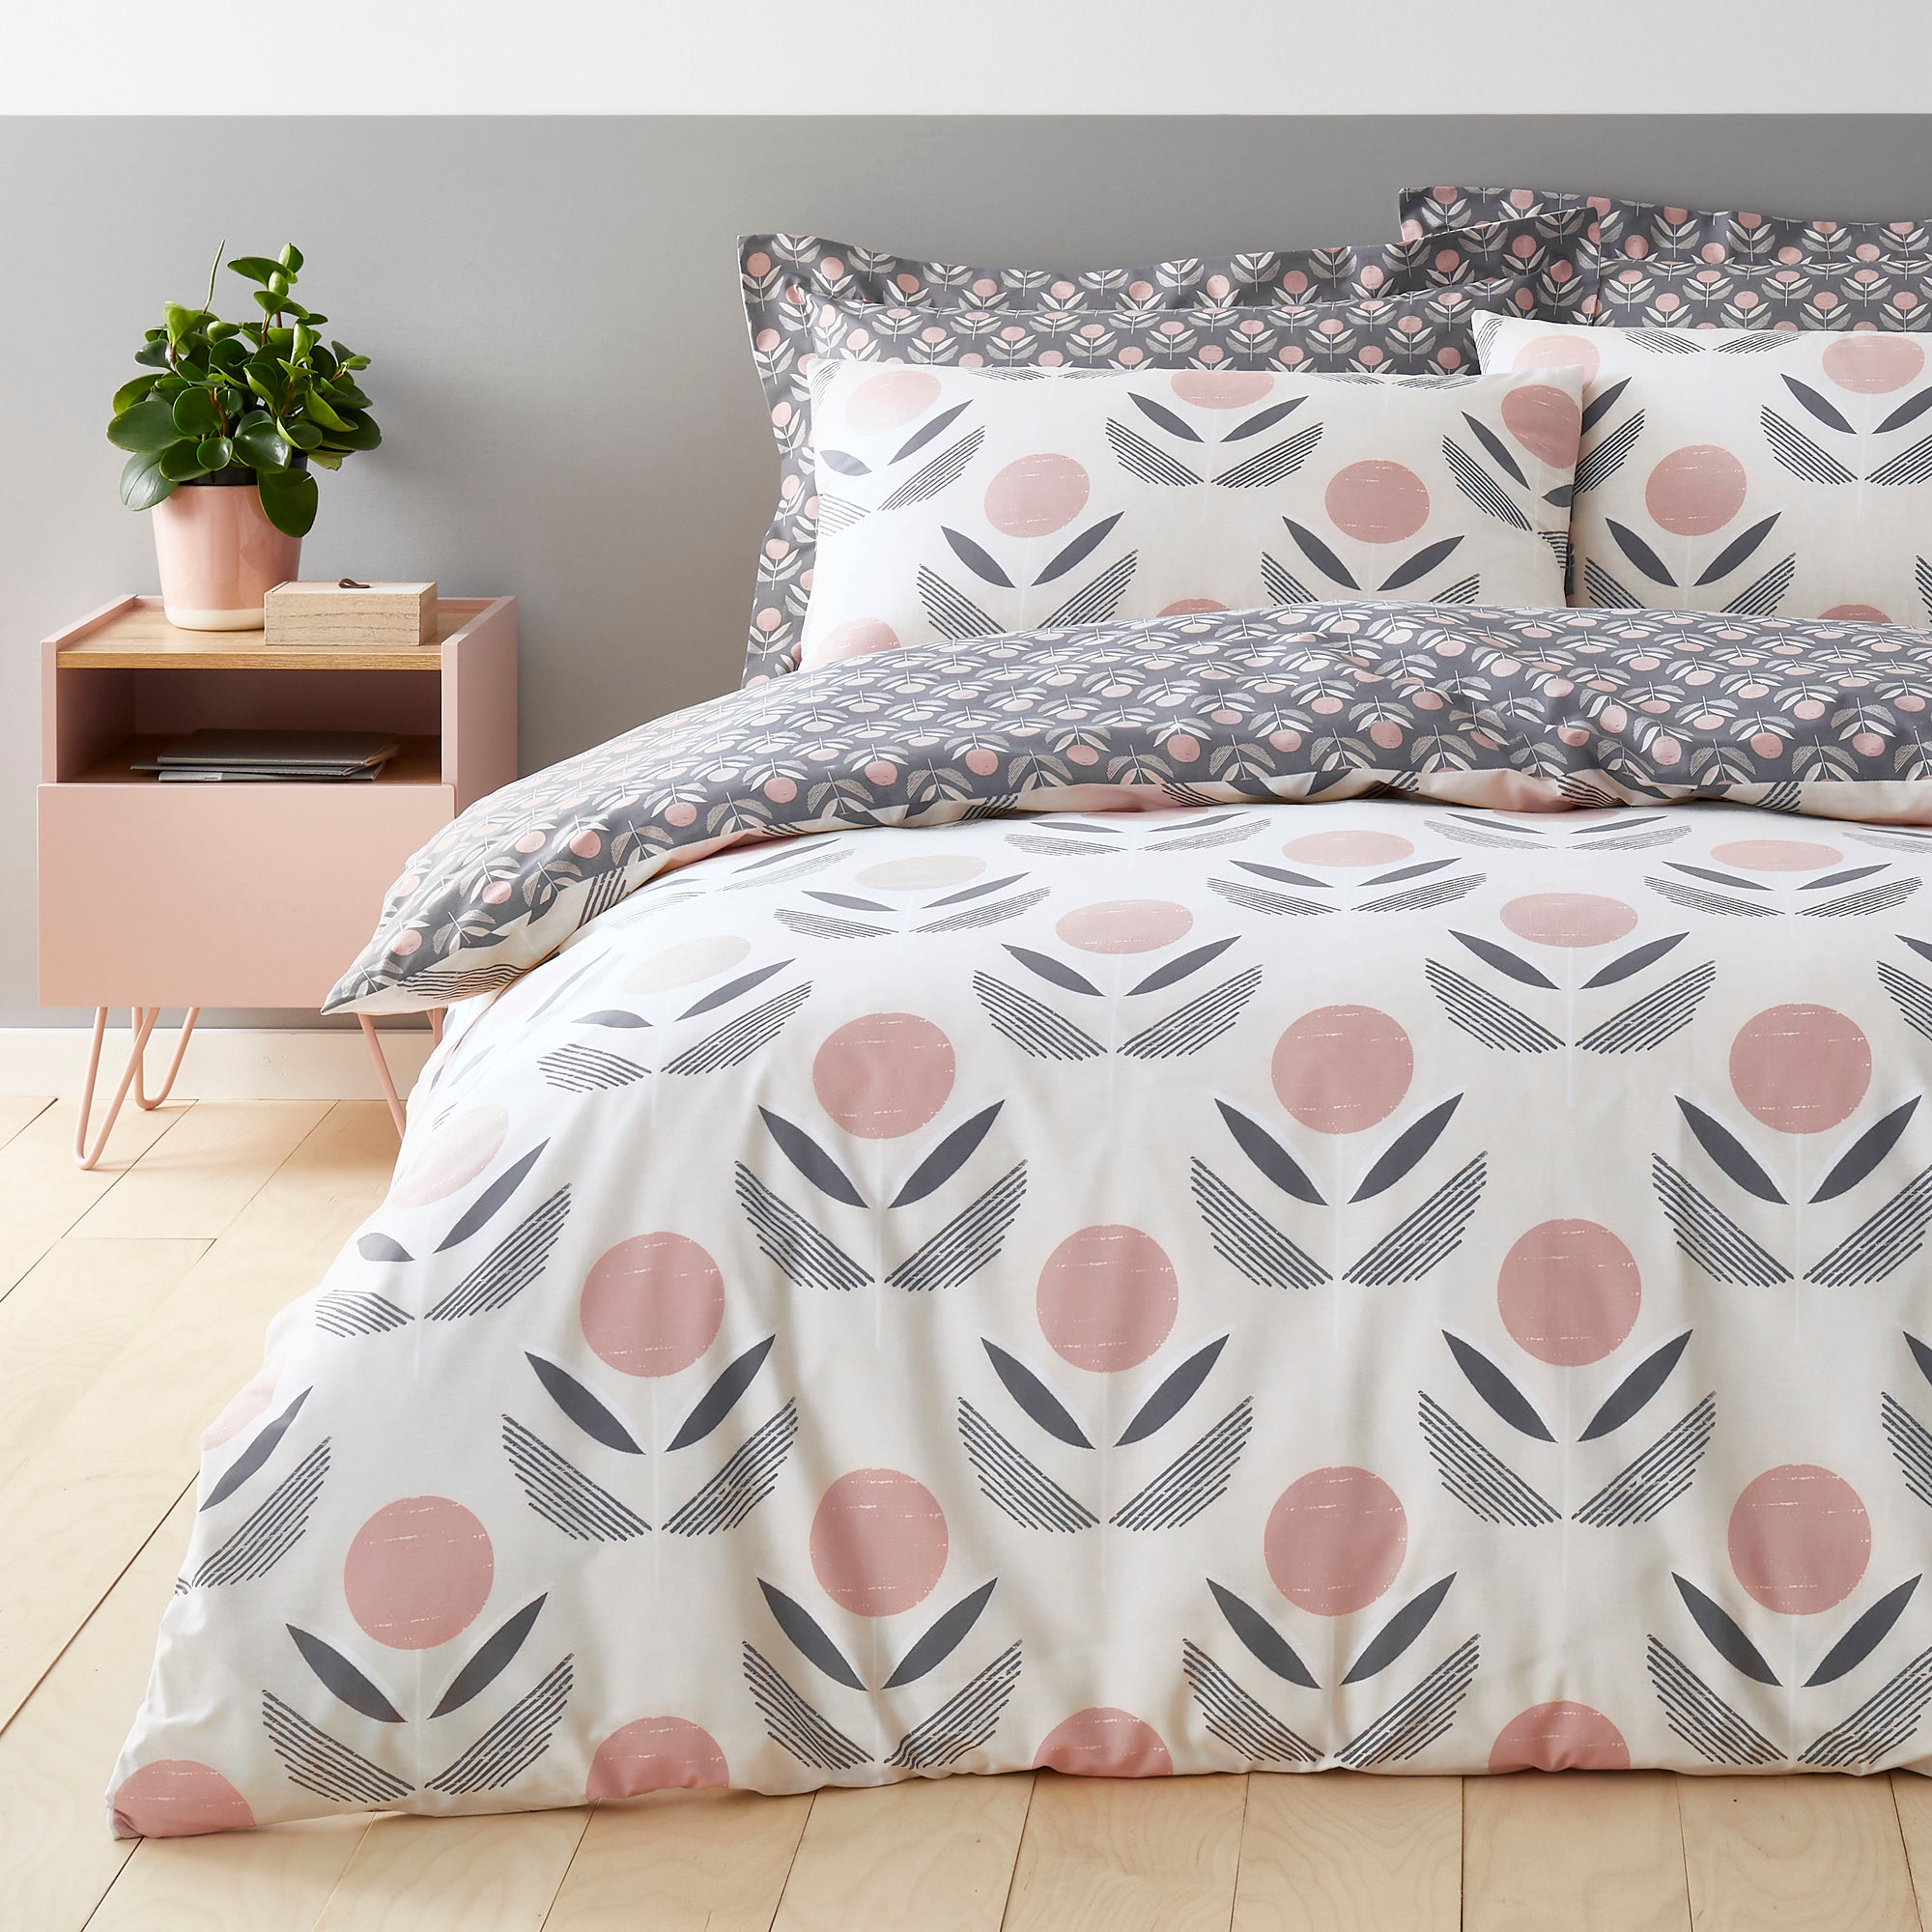 Elements Asa Charcoal And Blush Duvet Cover And Pillowcase Set Charcoalwhitebeige